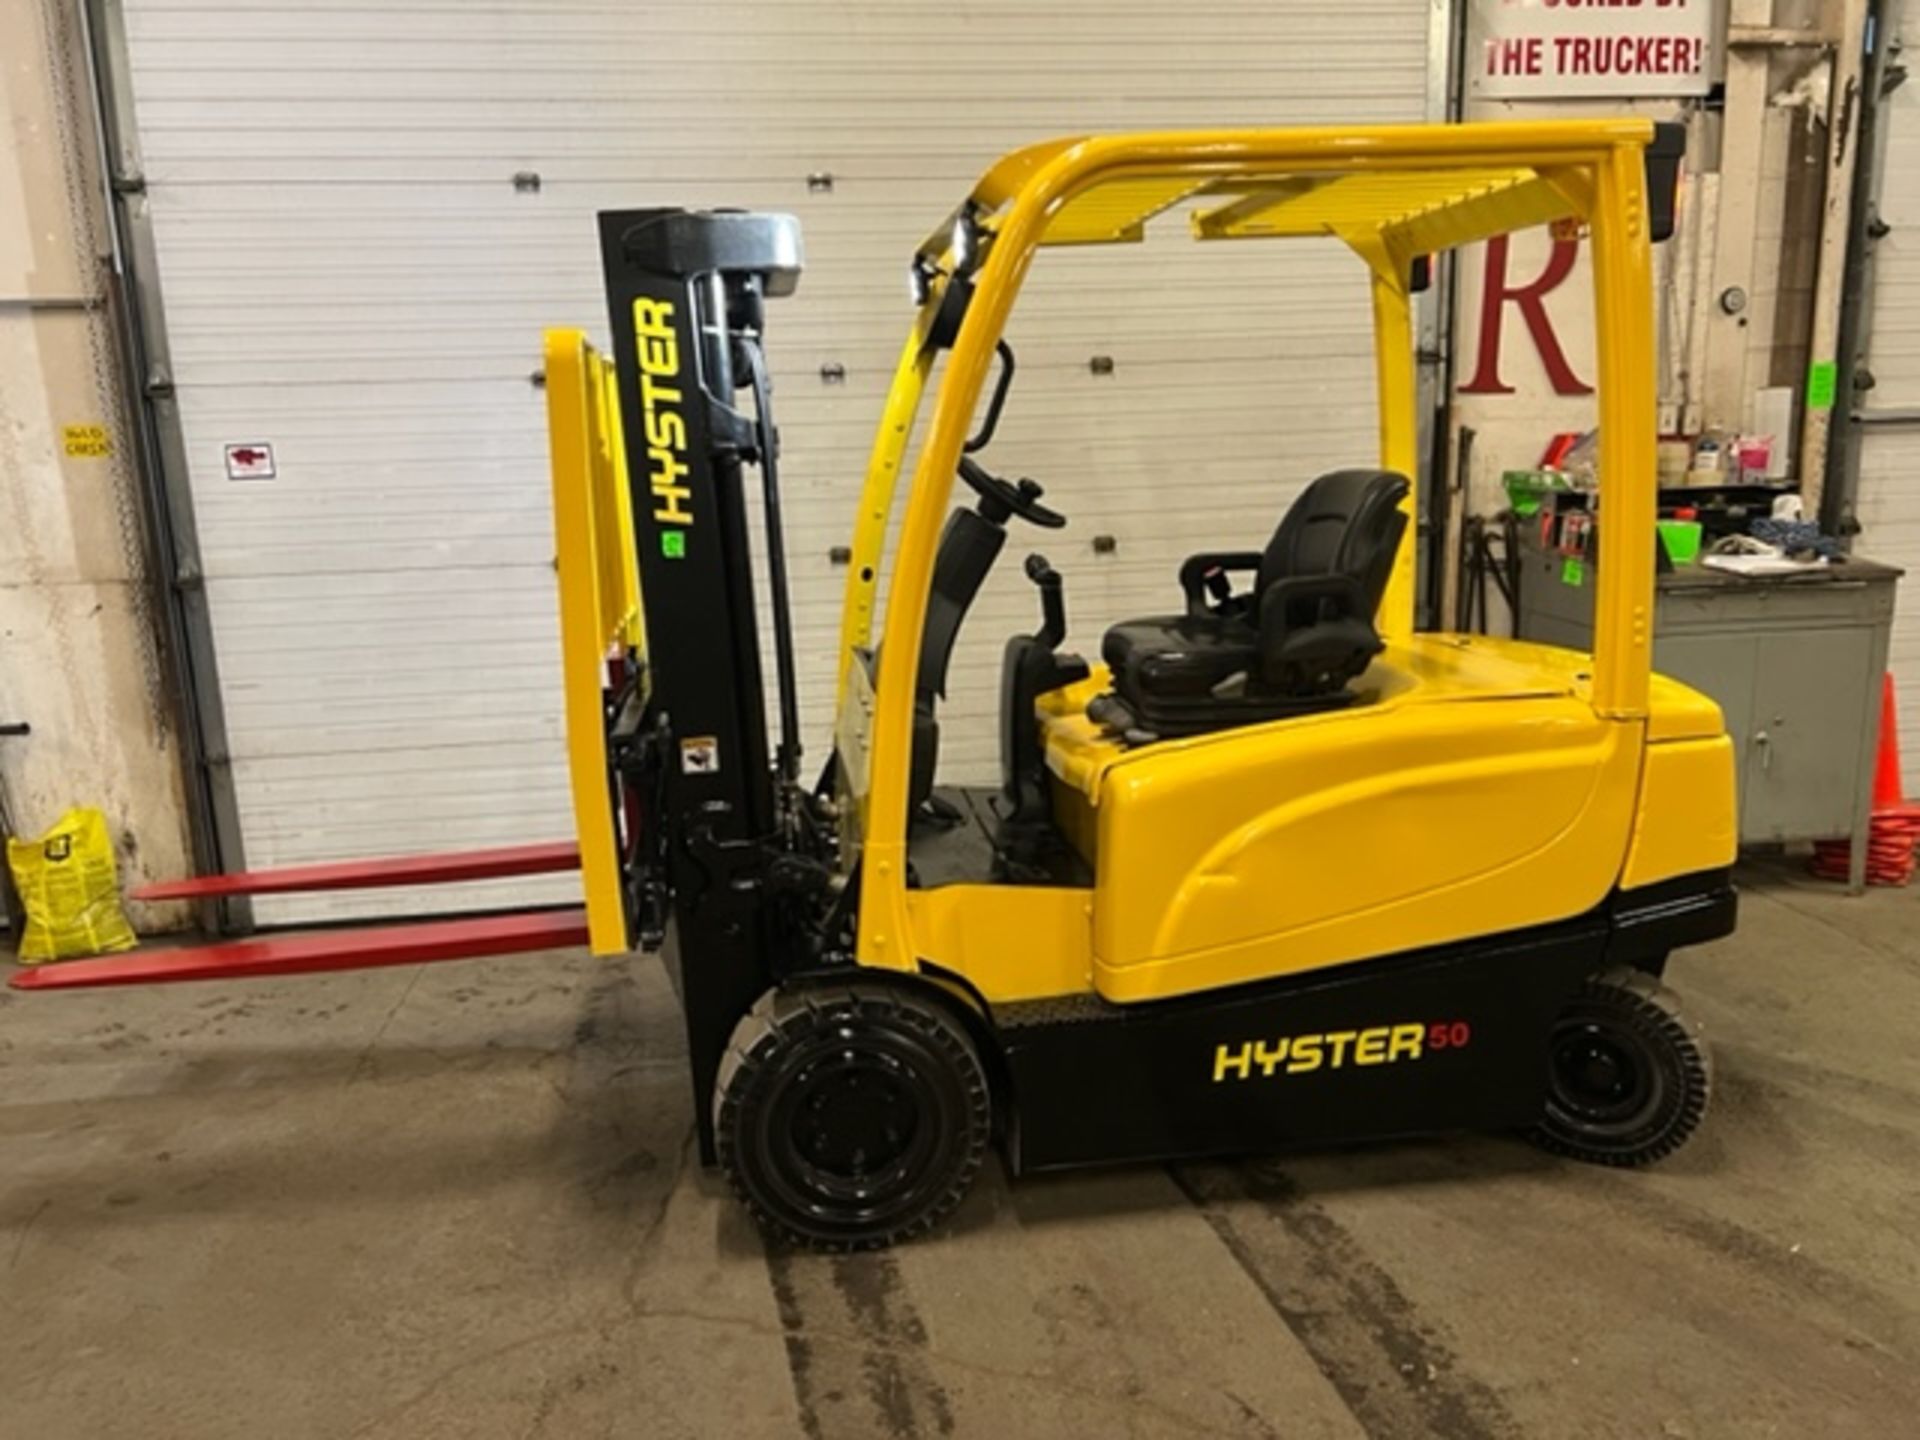 FREE CUSTOMS - MINT LIKE NEW 2015 Hyster model 50 - 5,000lbs Capacity Indoor Outdoor Forklift